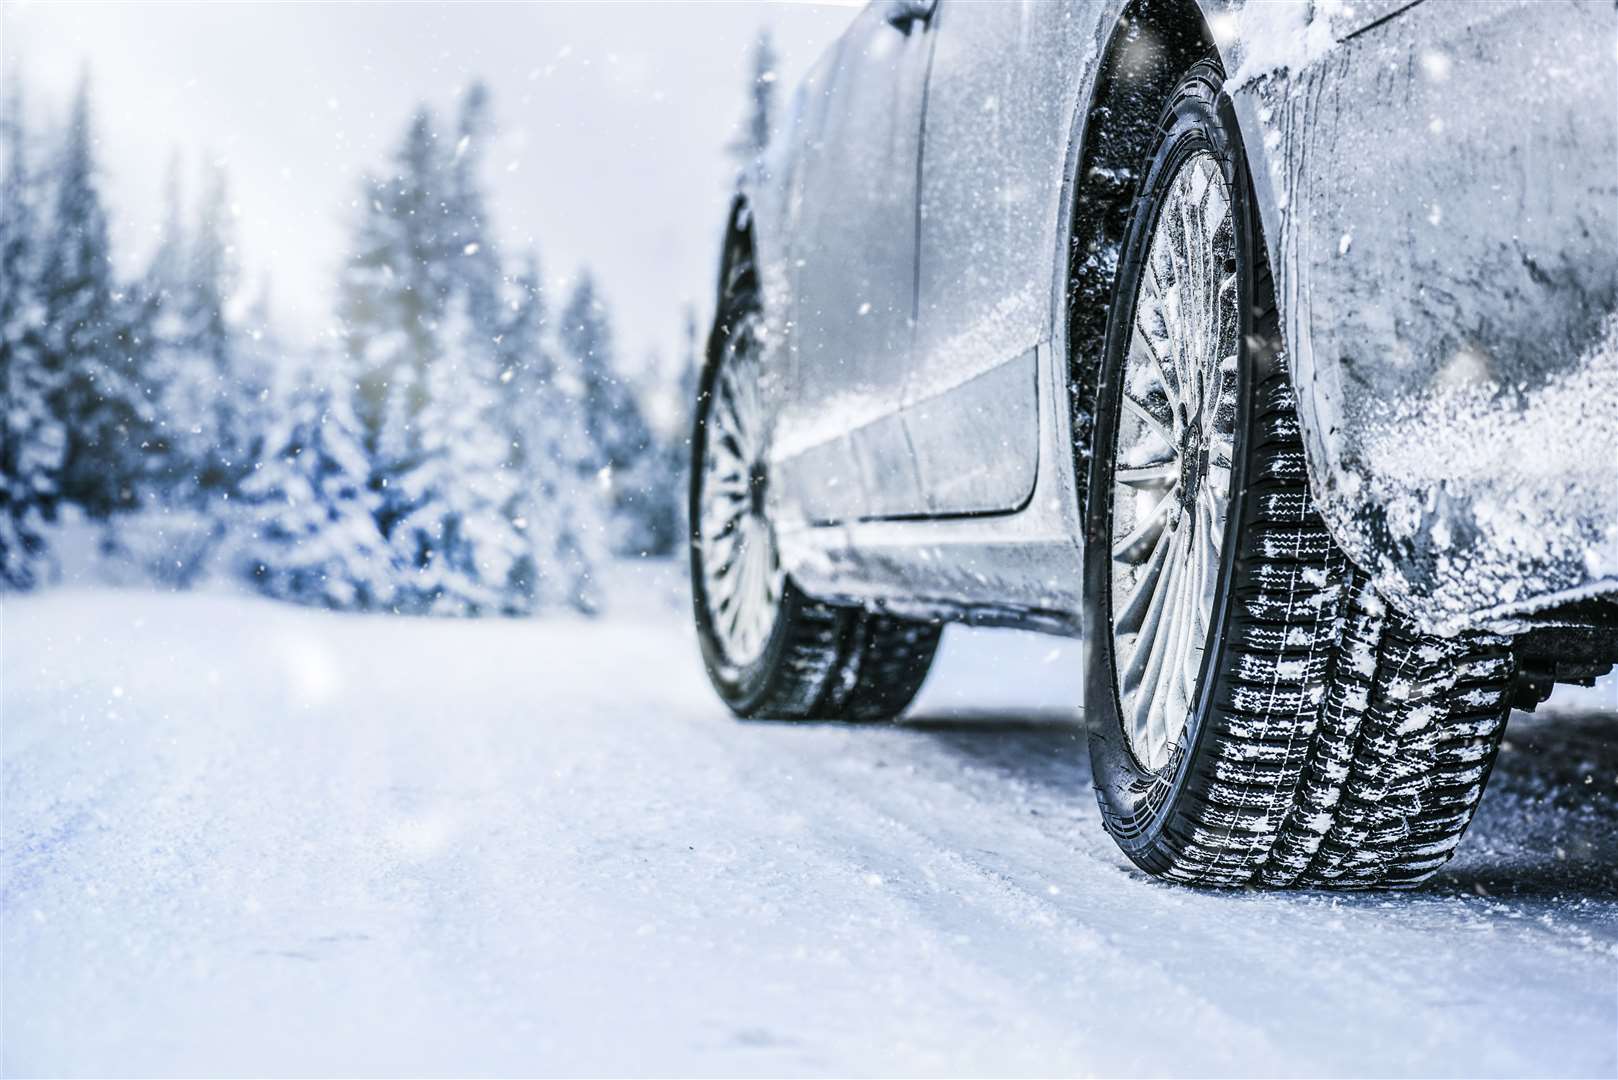 Checking tyre pressure for winter driving is a must, say the experts, with a number of benefits.